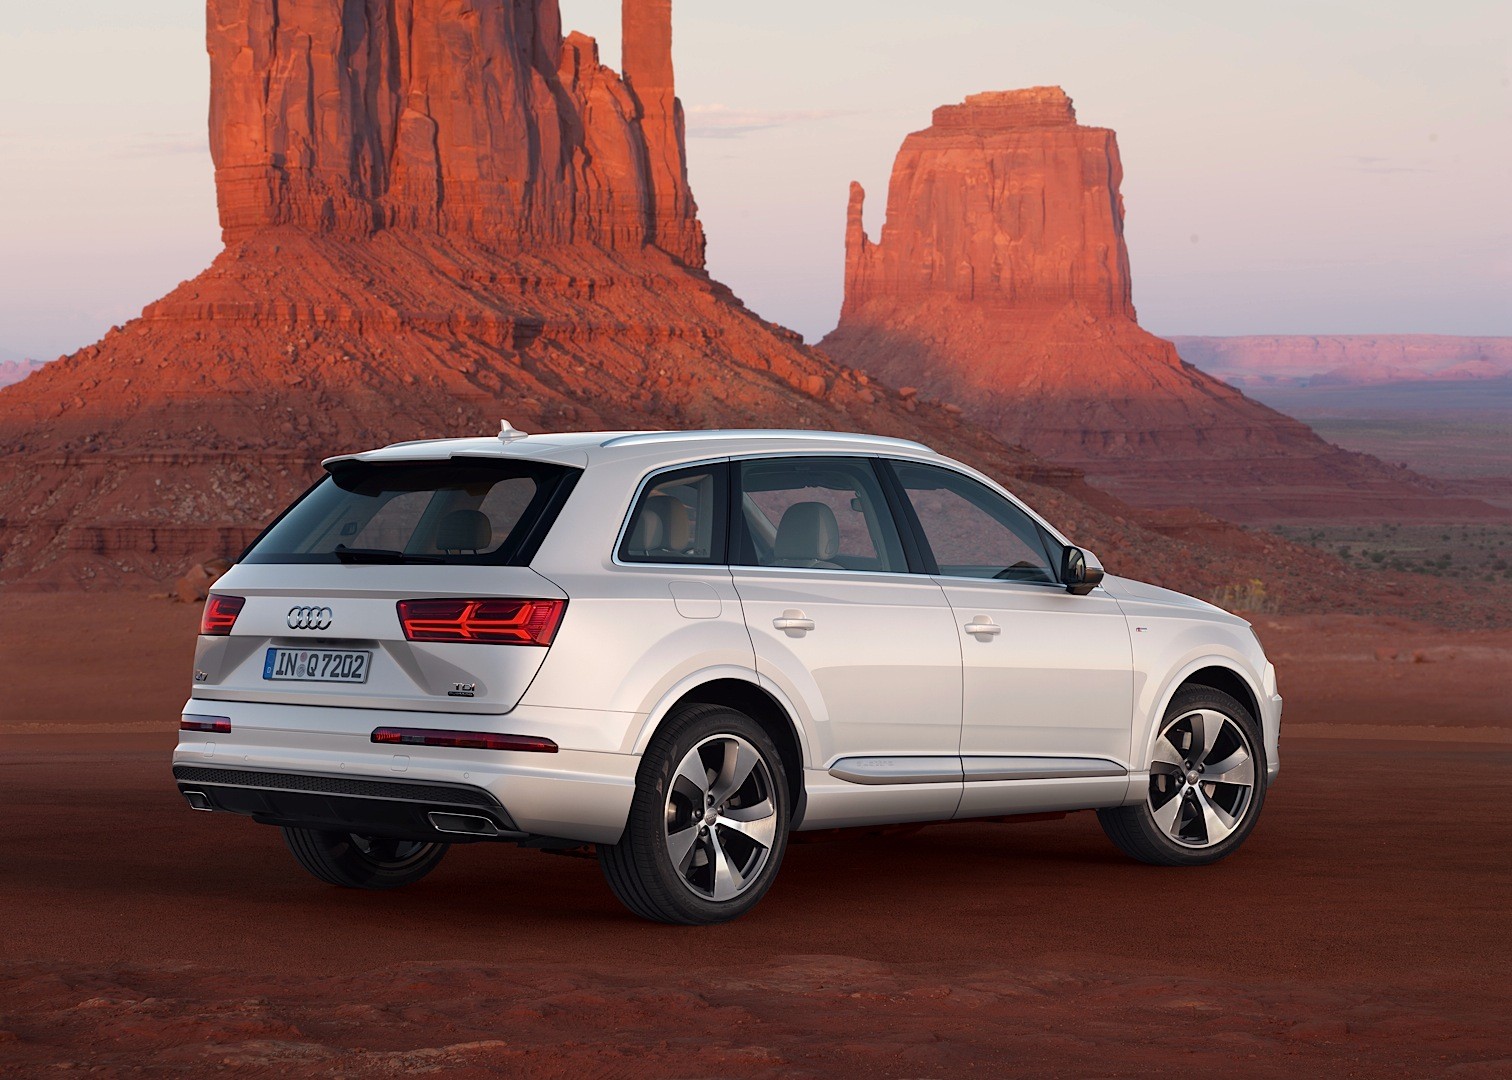 Audi Shows 2015 Q7 in New Tofana White Color, Reveals Obsession with